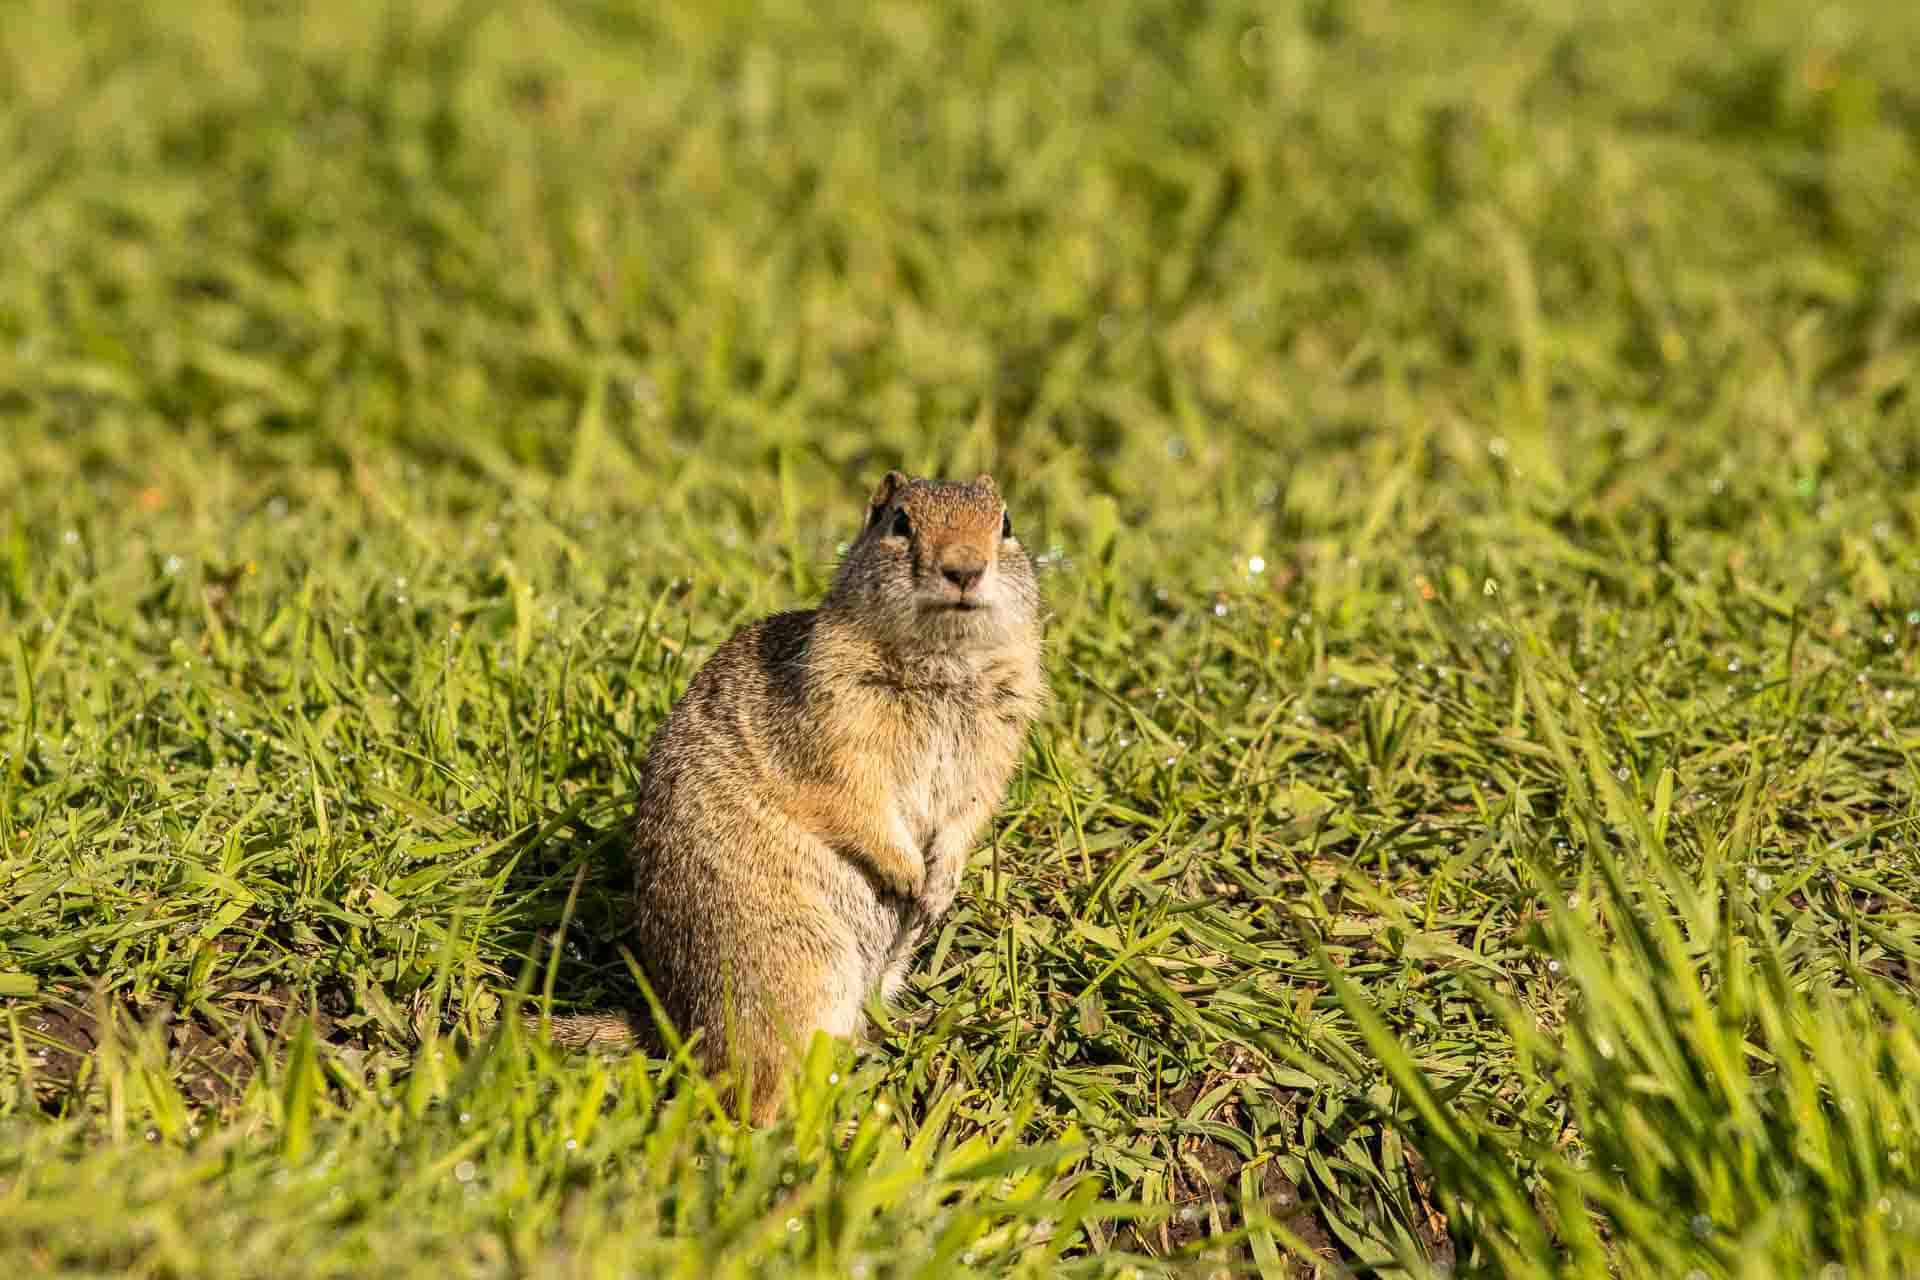 Ground squirrel checking out its surroundings